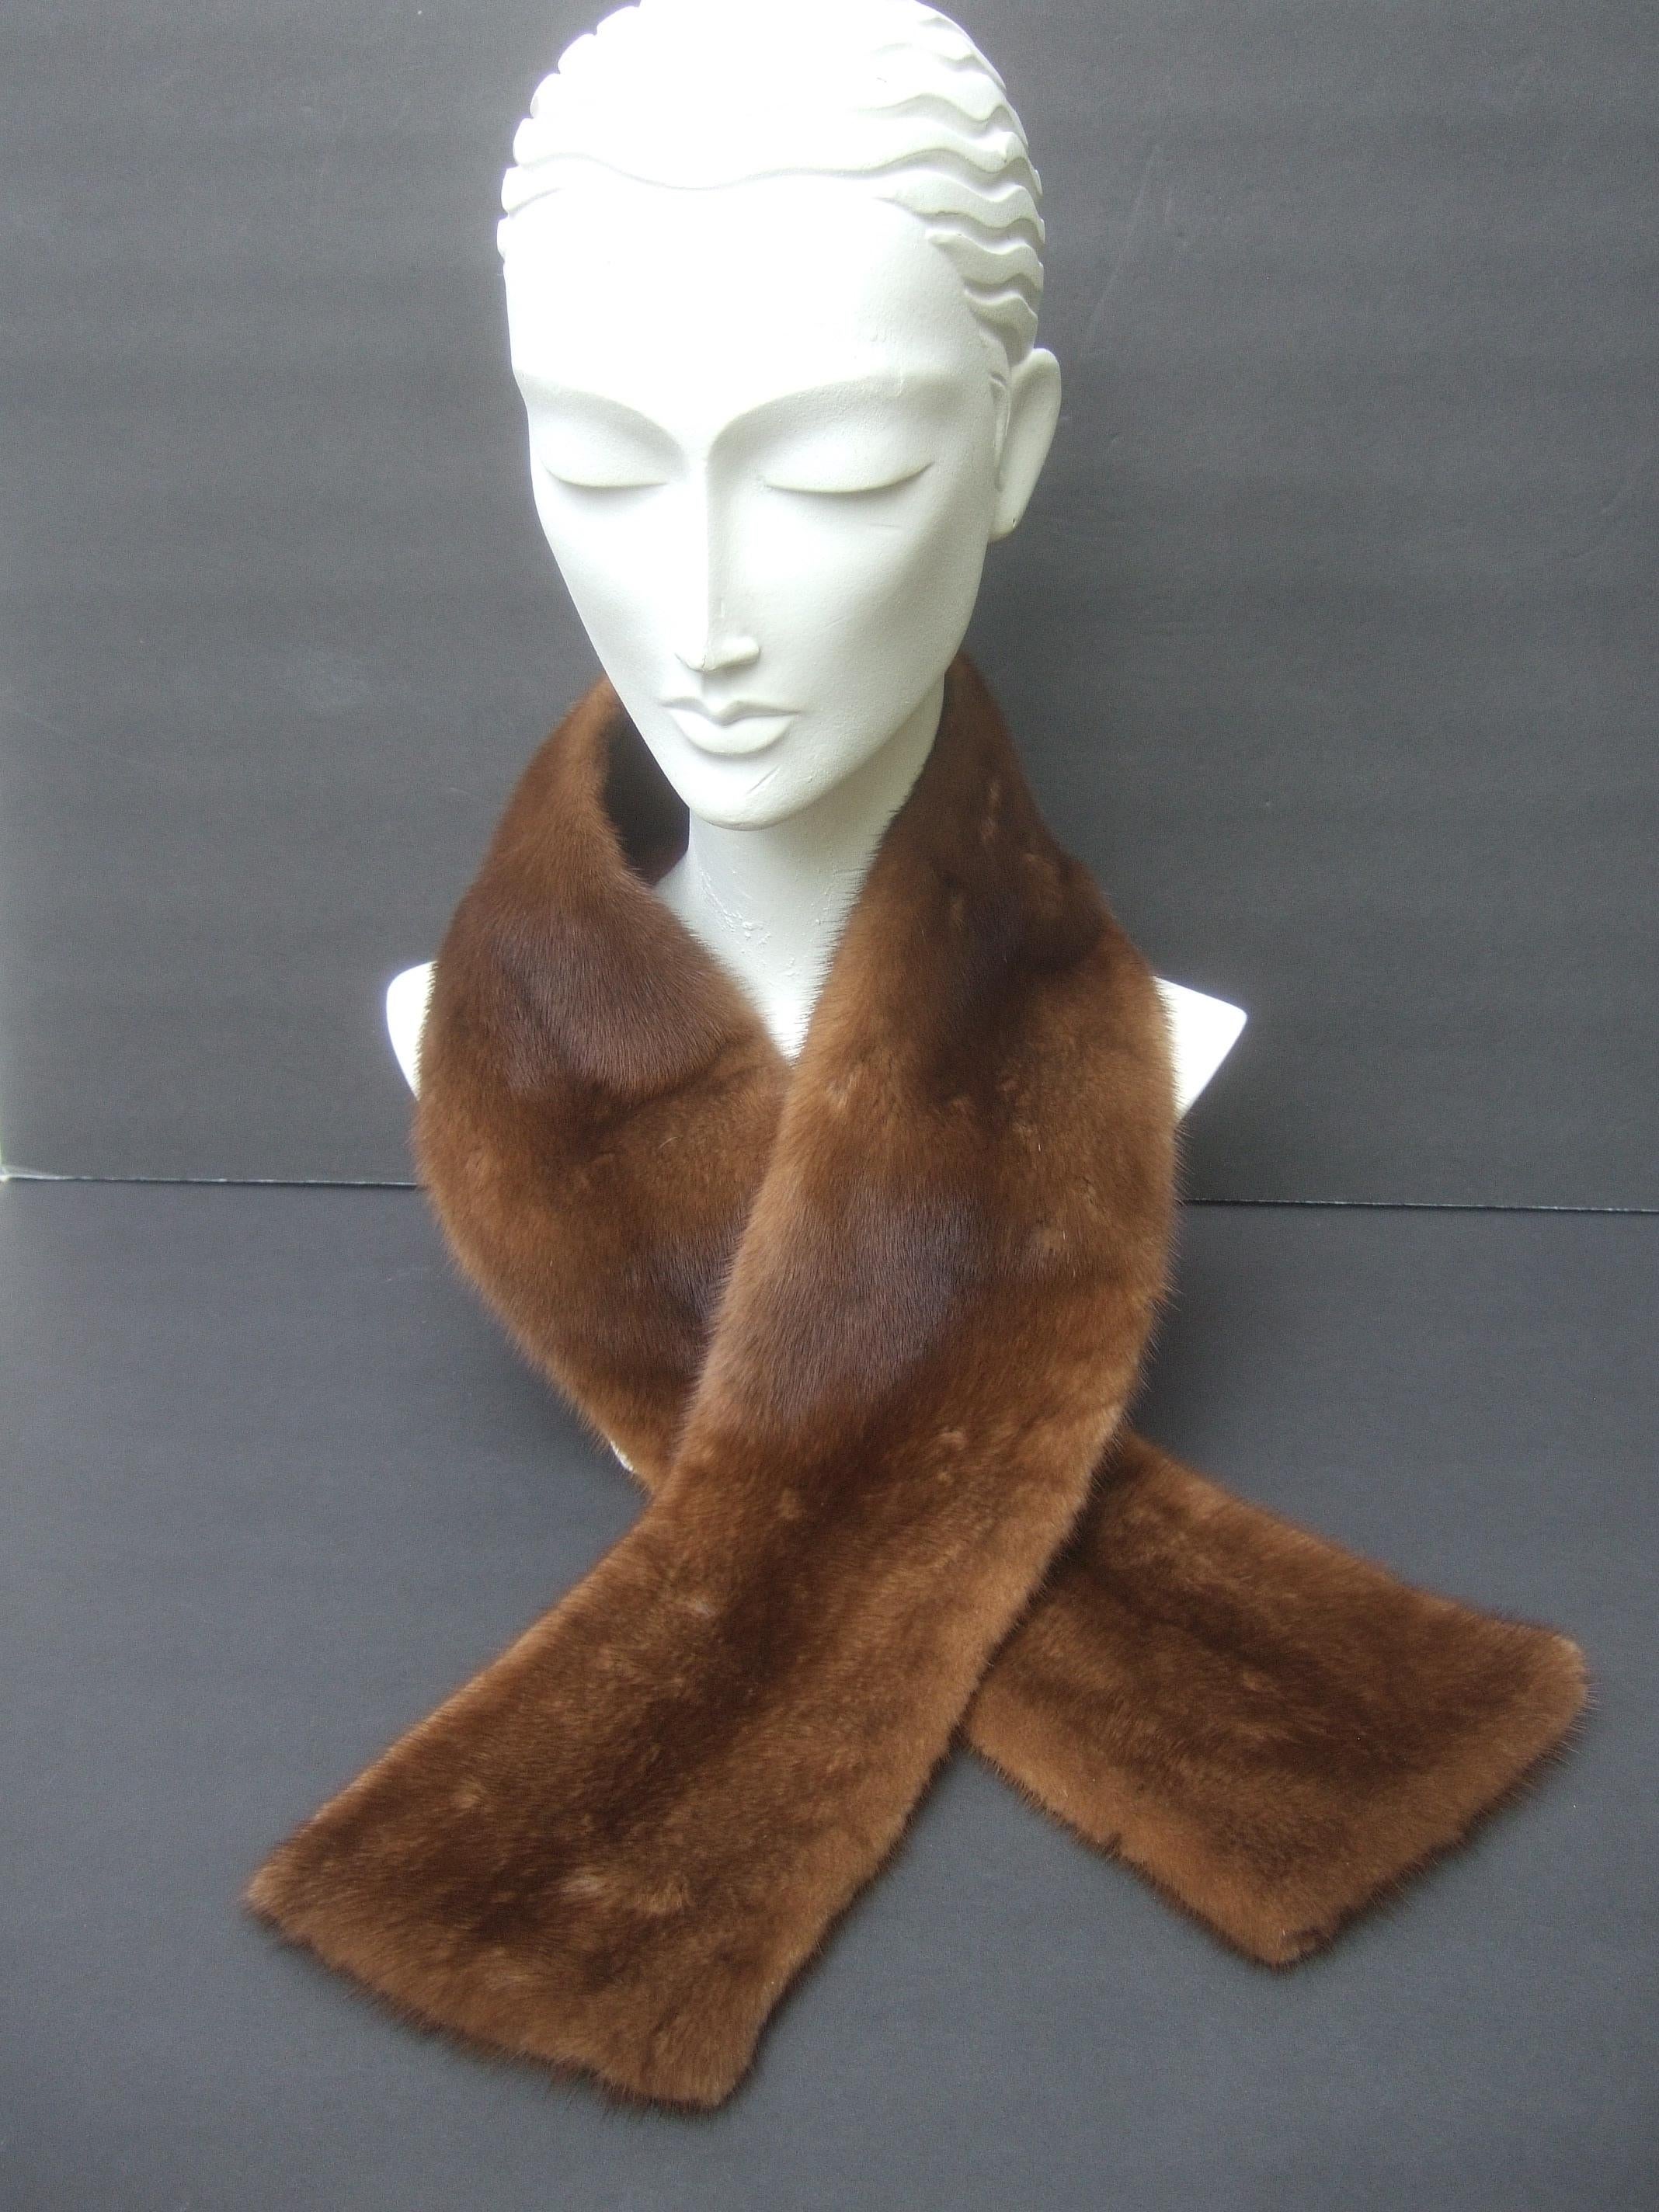 Plush mink fur collar designed by Pologeorgis for Neiman Marcus c 1990s
The luxurious brown mink fur collar is backed with brown satin acetate 
Makes a very chic accessory wrapped around the neck 

Designed without hooks or closures; rather wraps